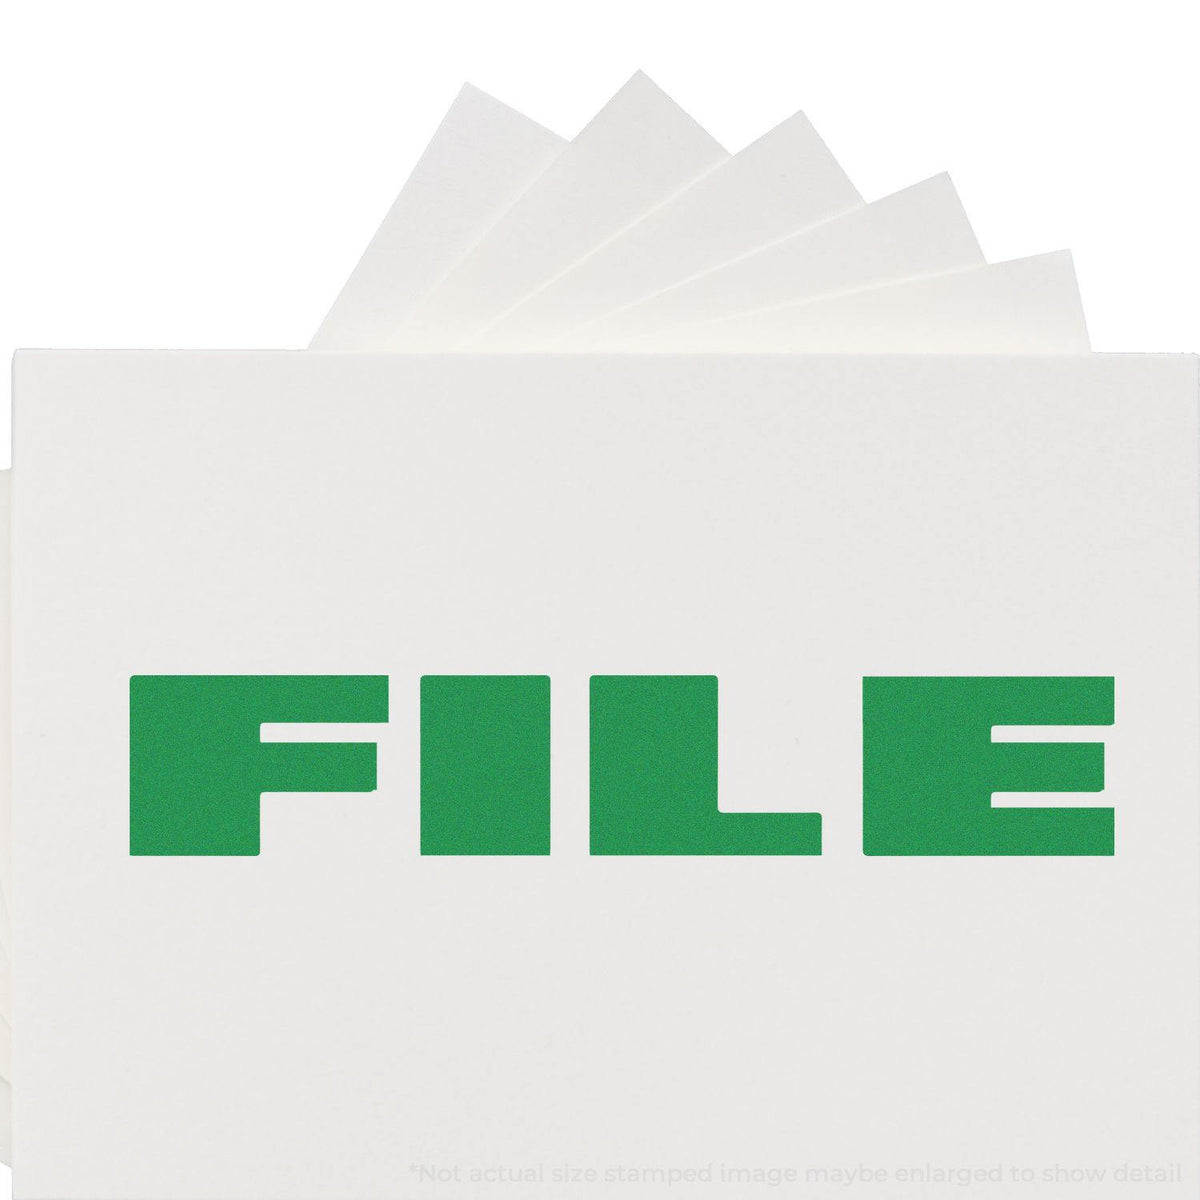 In Use Large Self-Inking Bold Font File Stamp Image